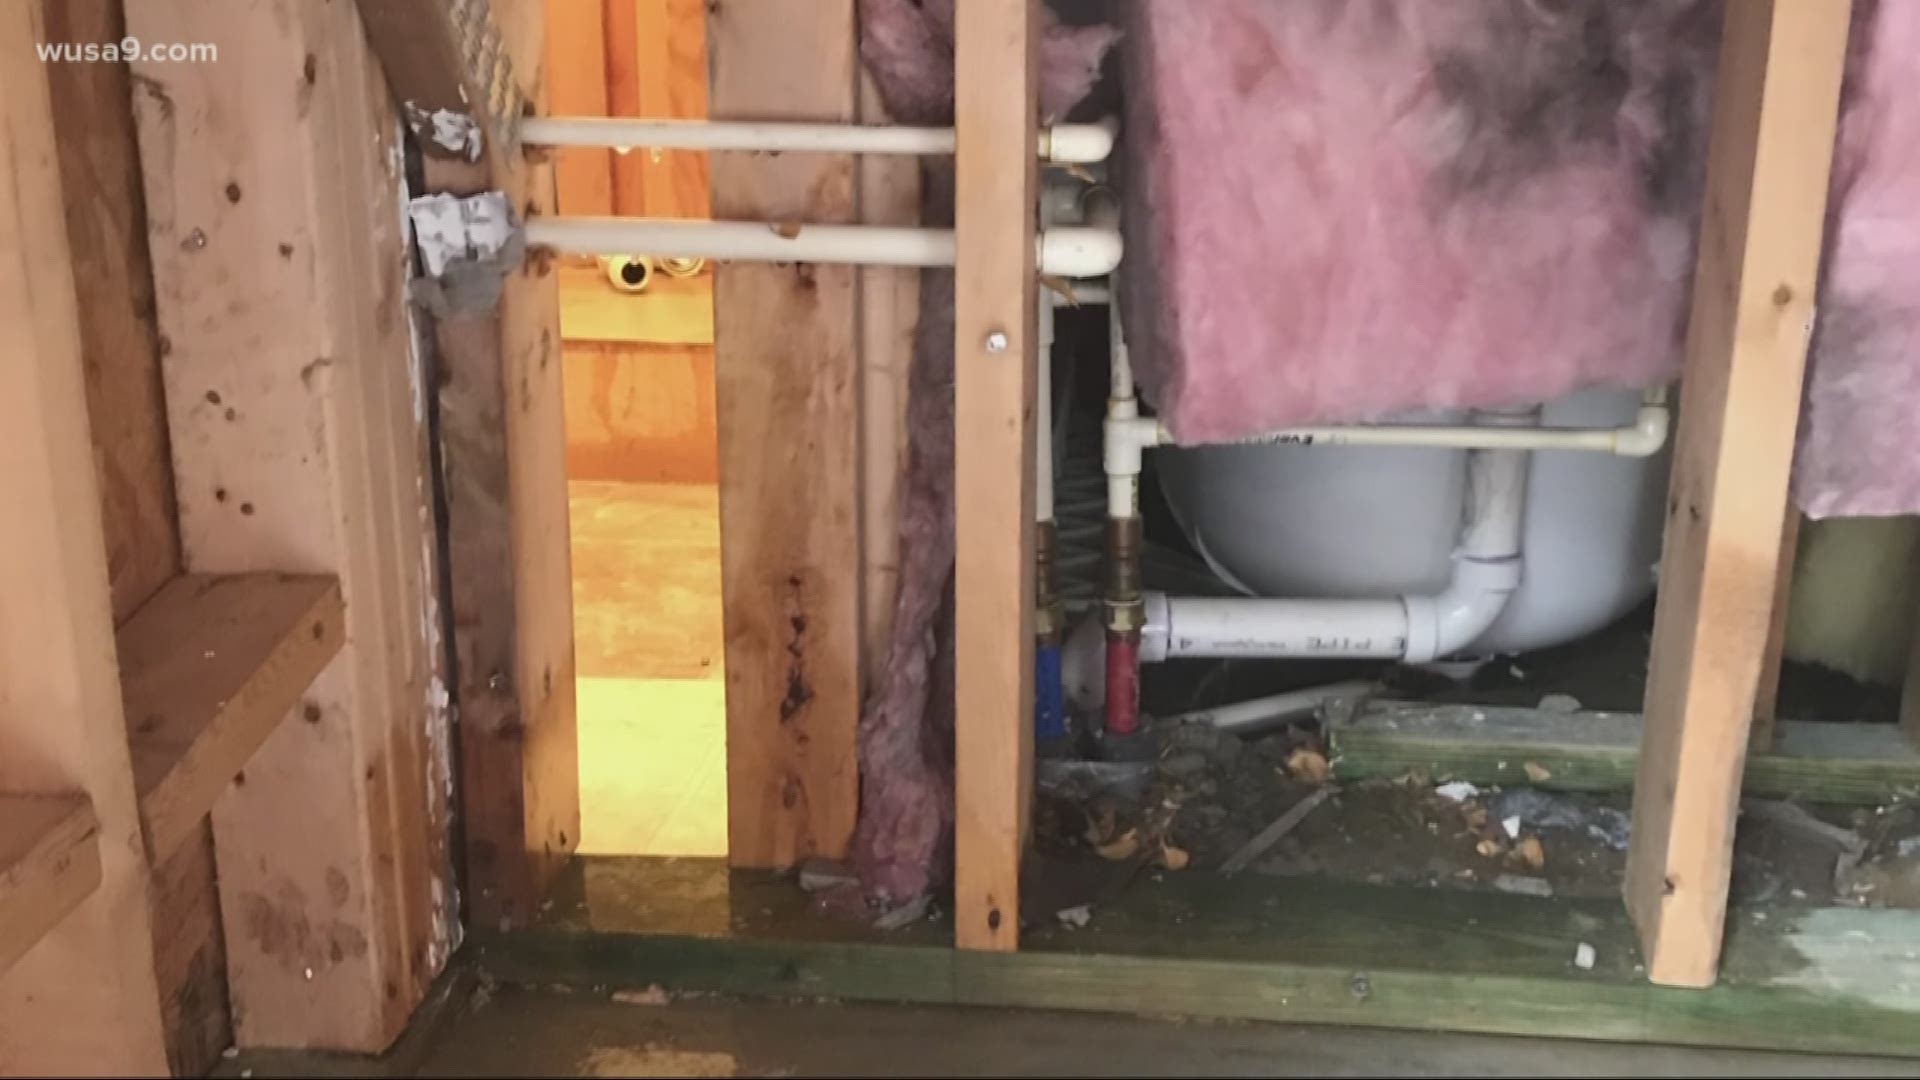 From black mold to brown bathwater, new report released Wednesday details a serious privatized military housing problem.